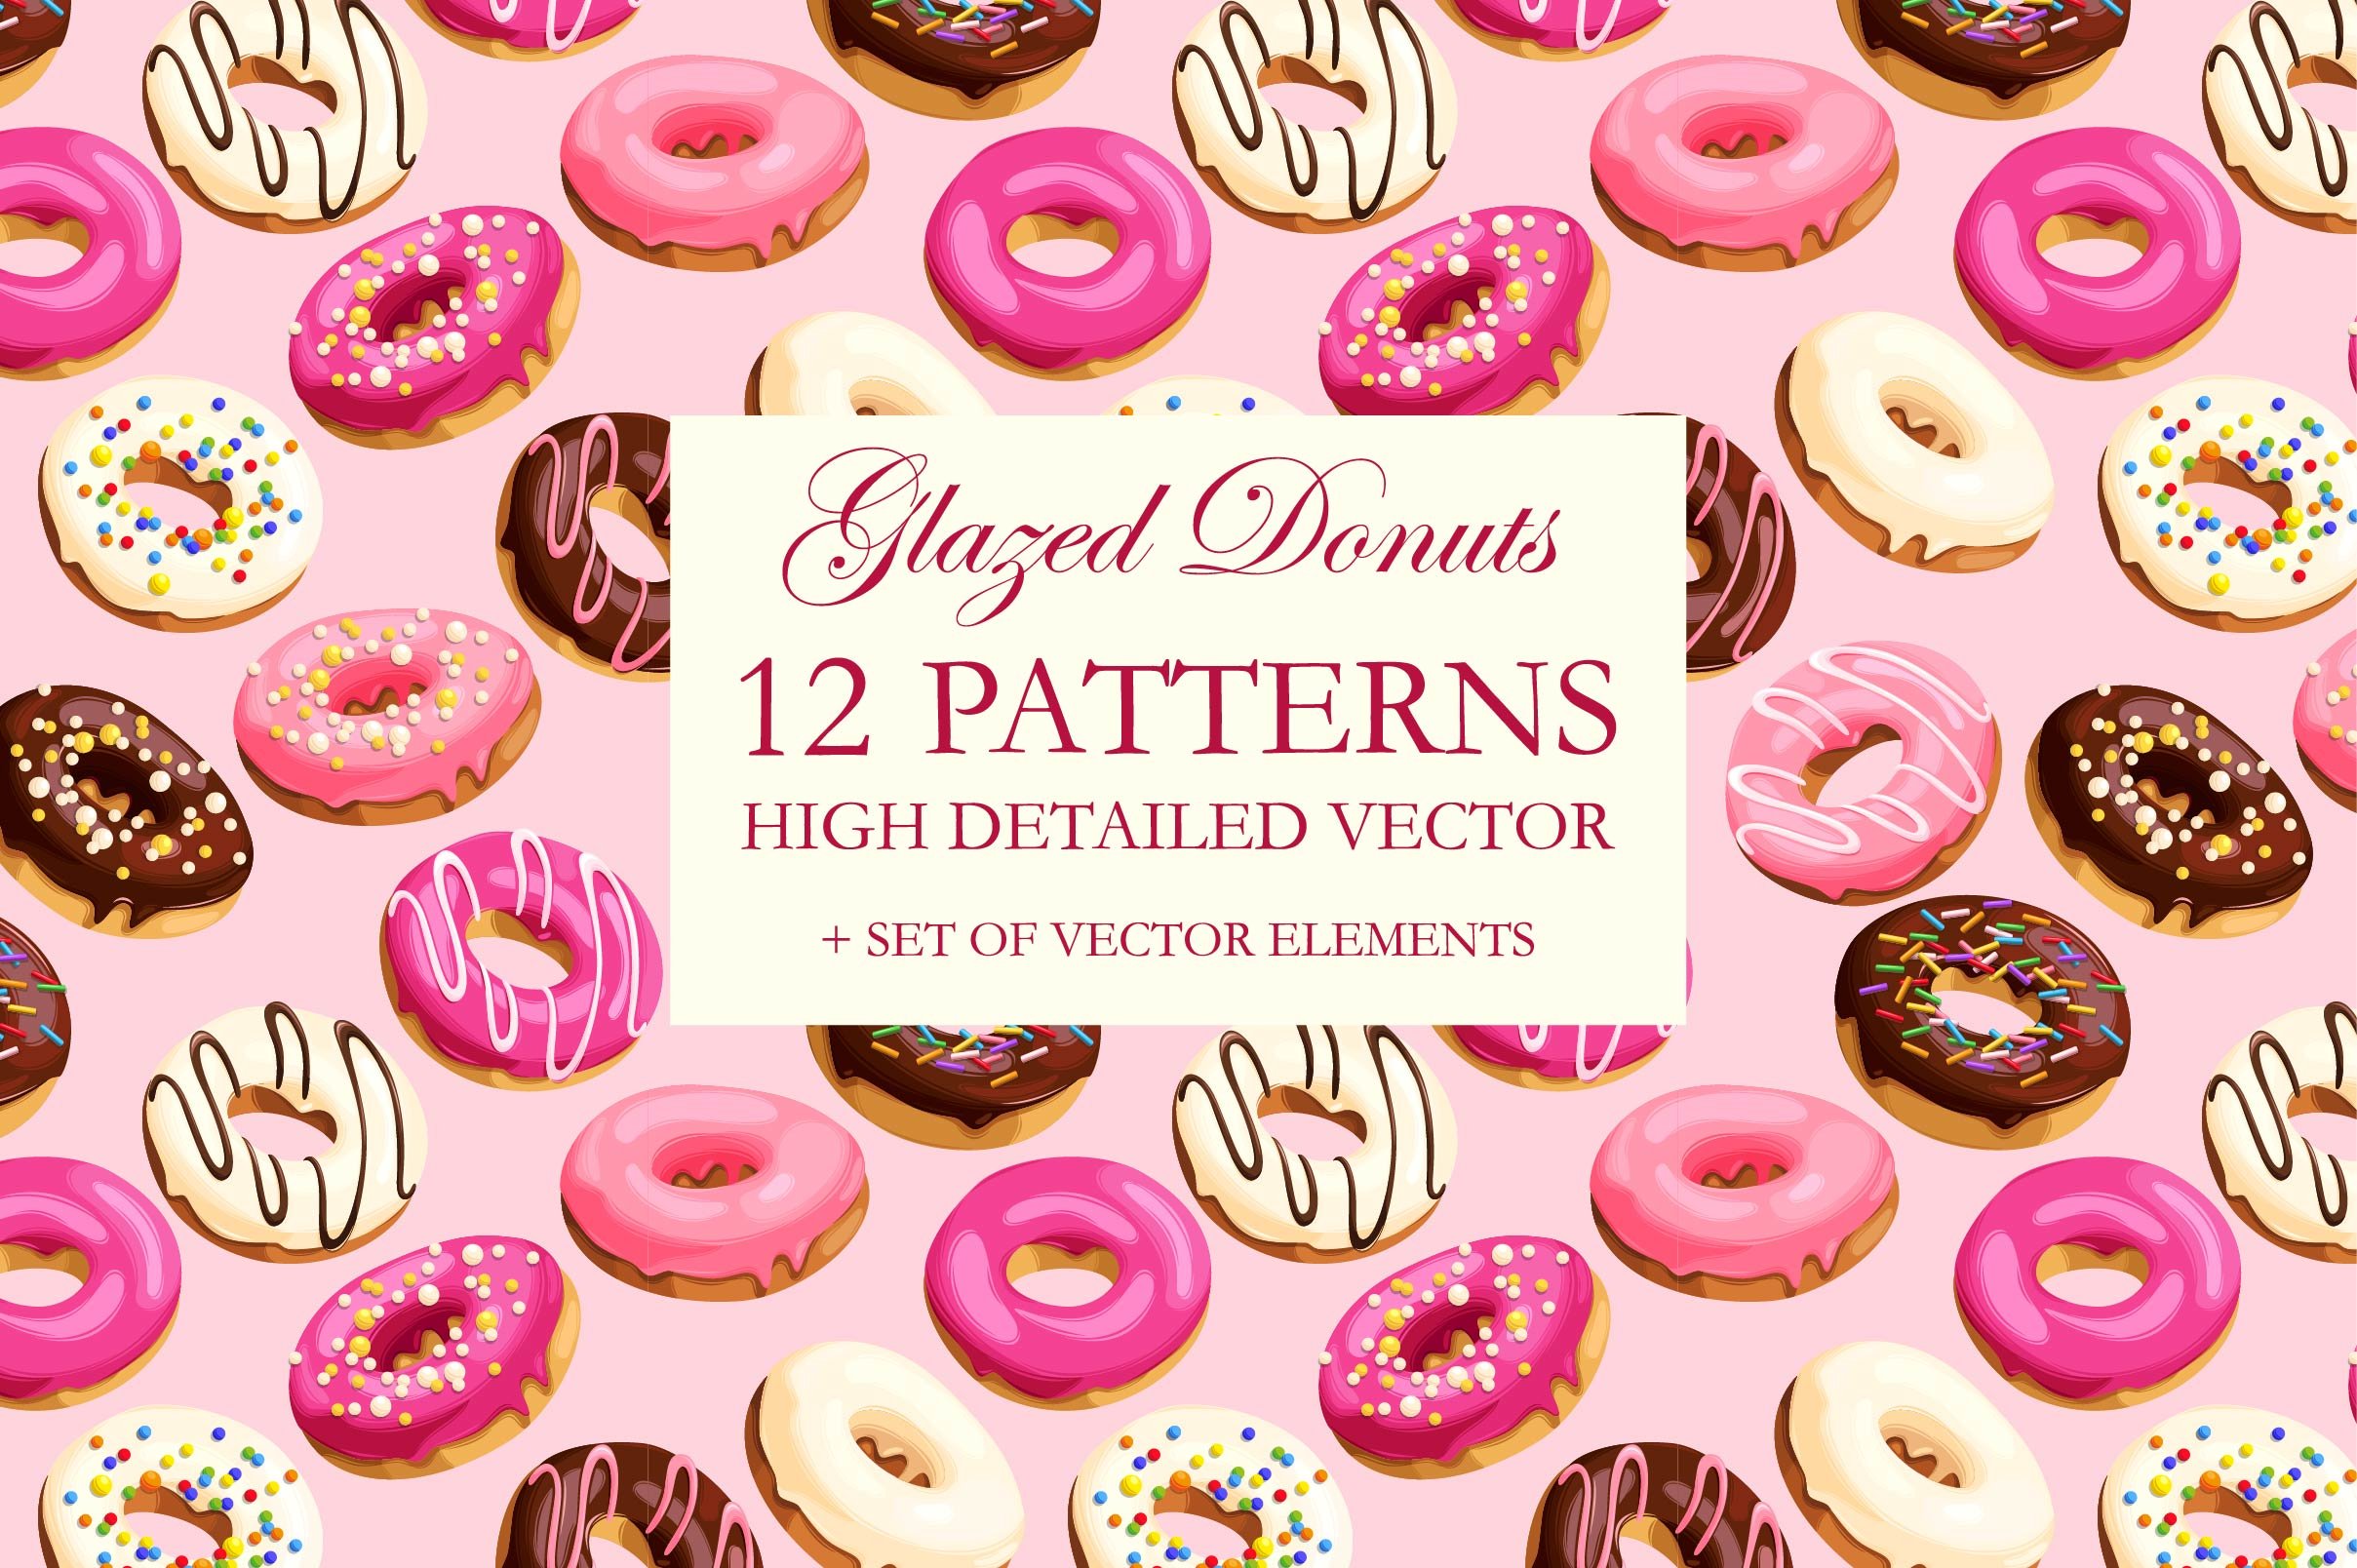 Donuts Patterns cover image.